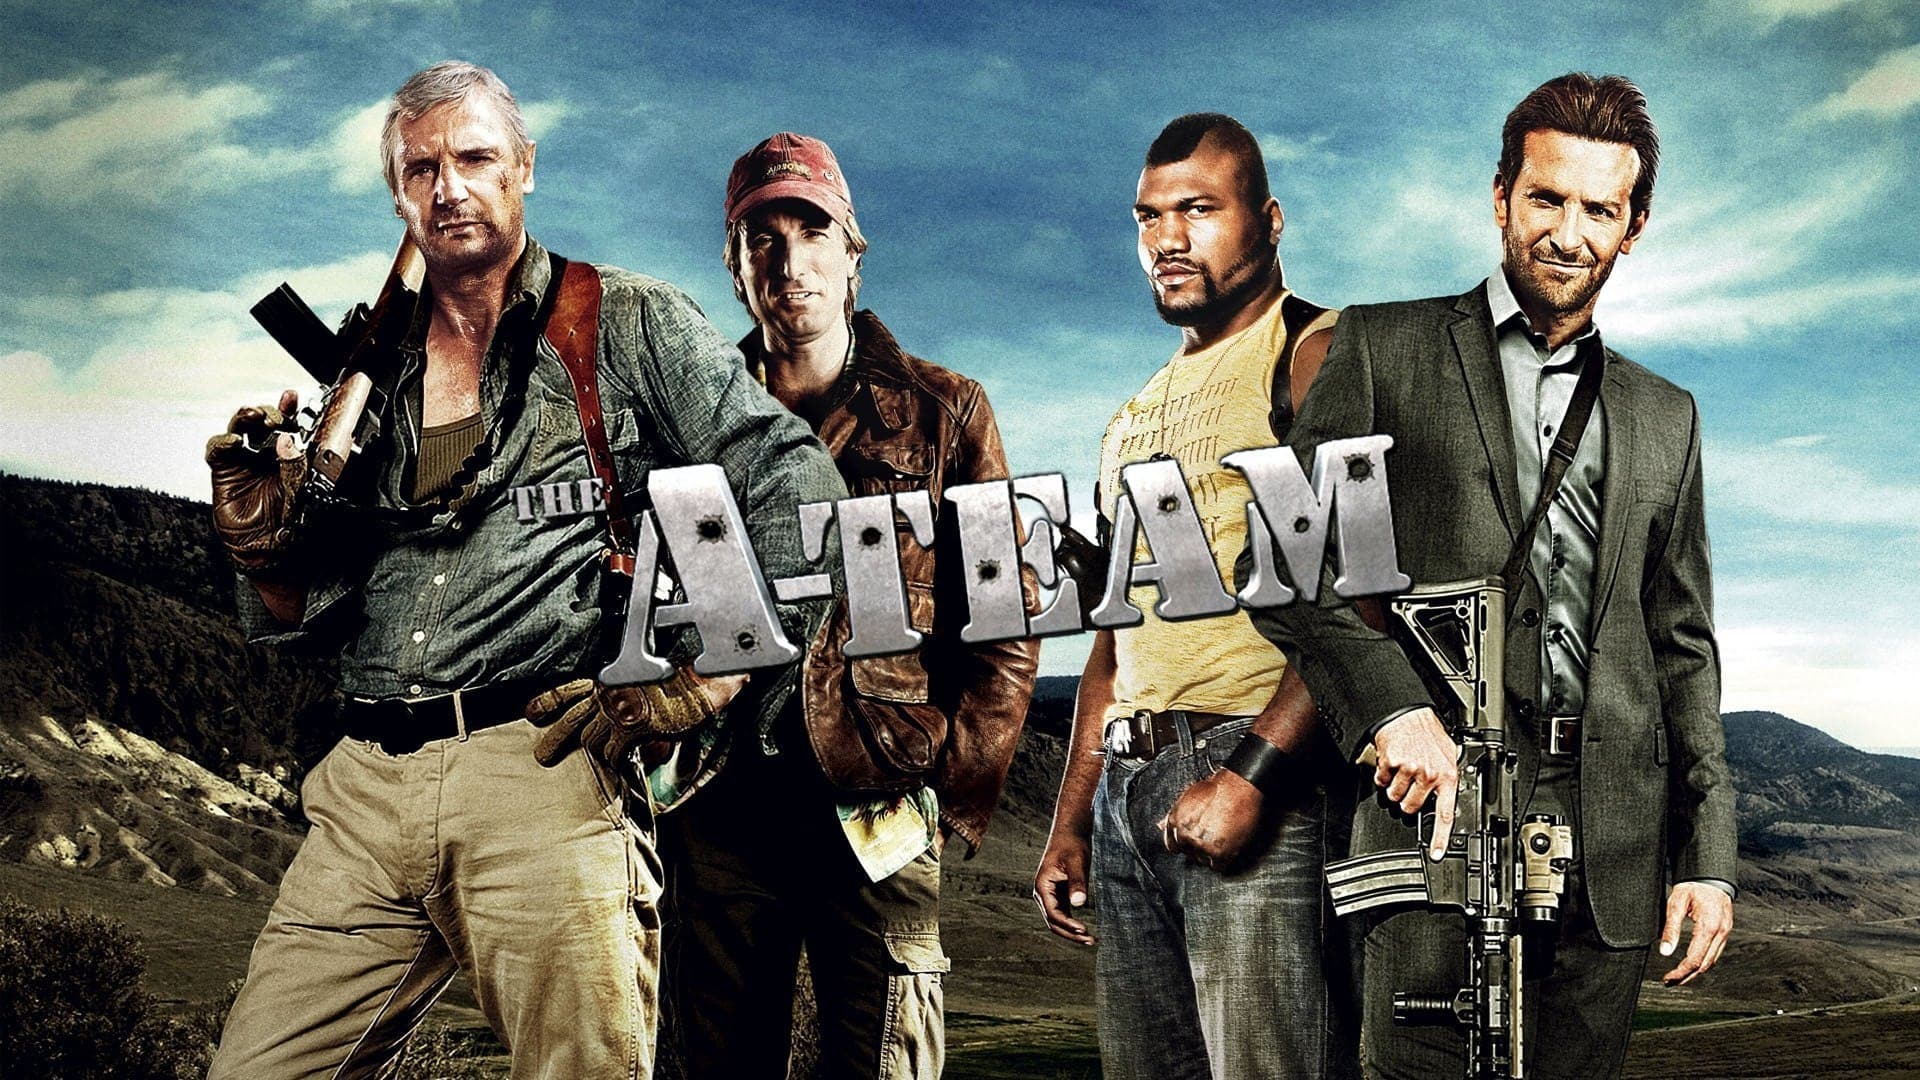 Watch The A-Team Online | Stream Full Movies